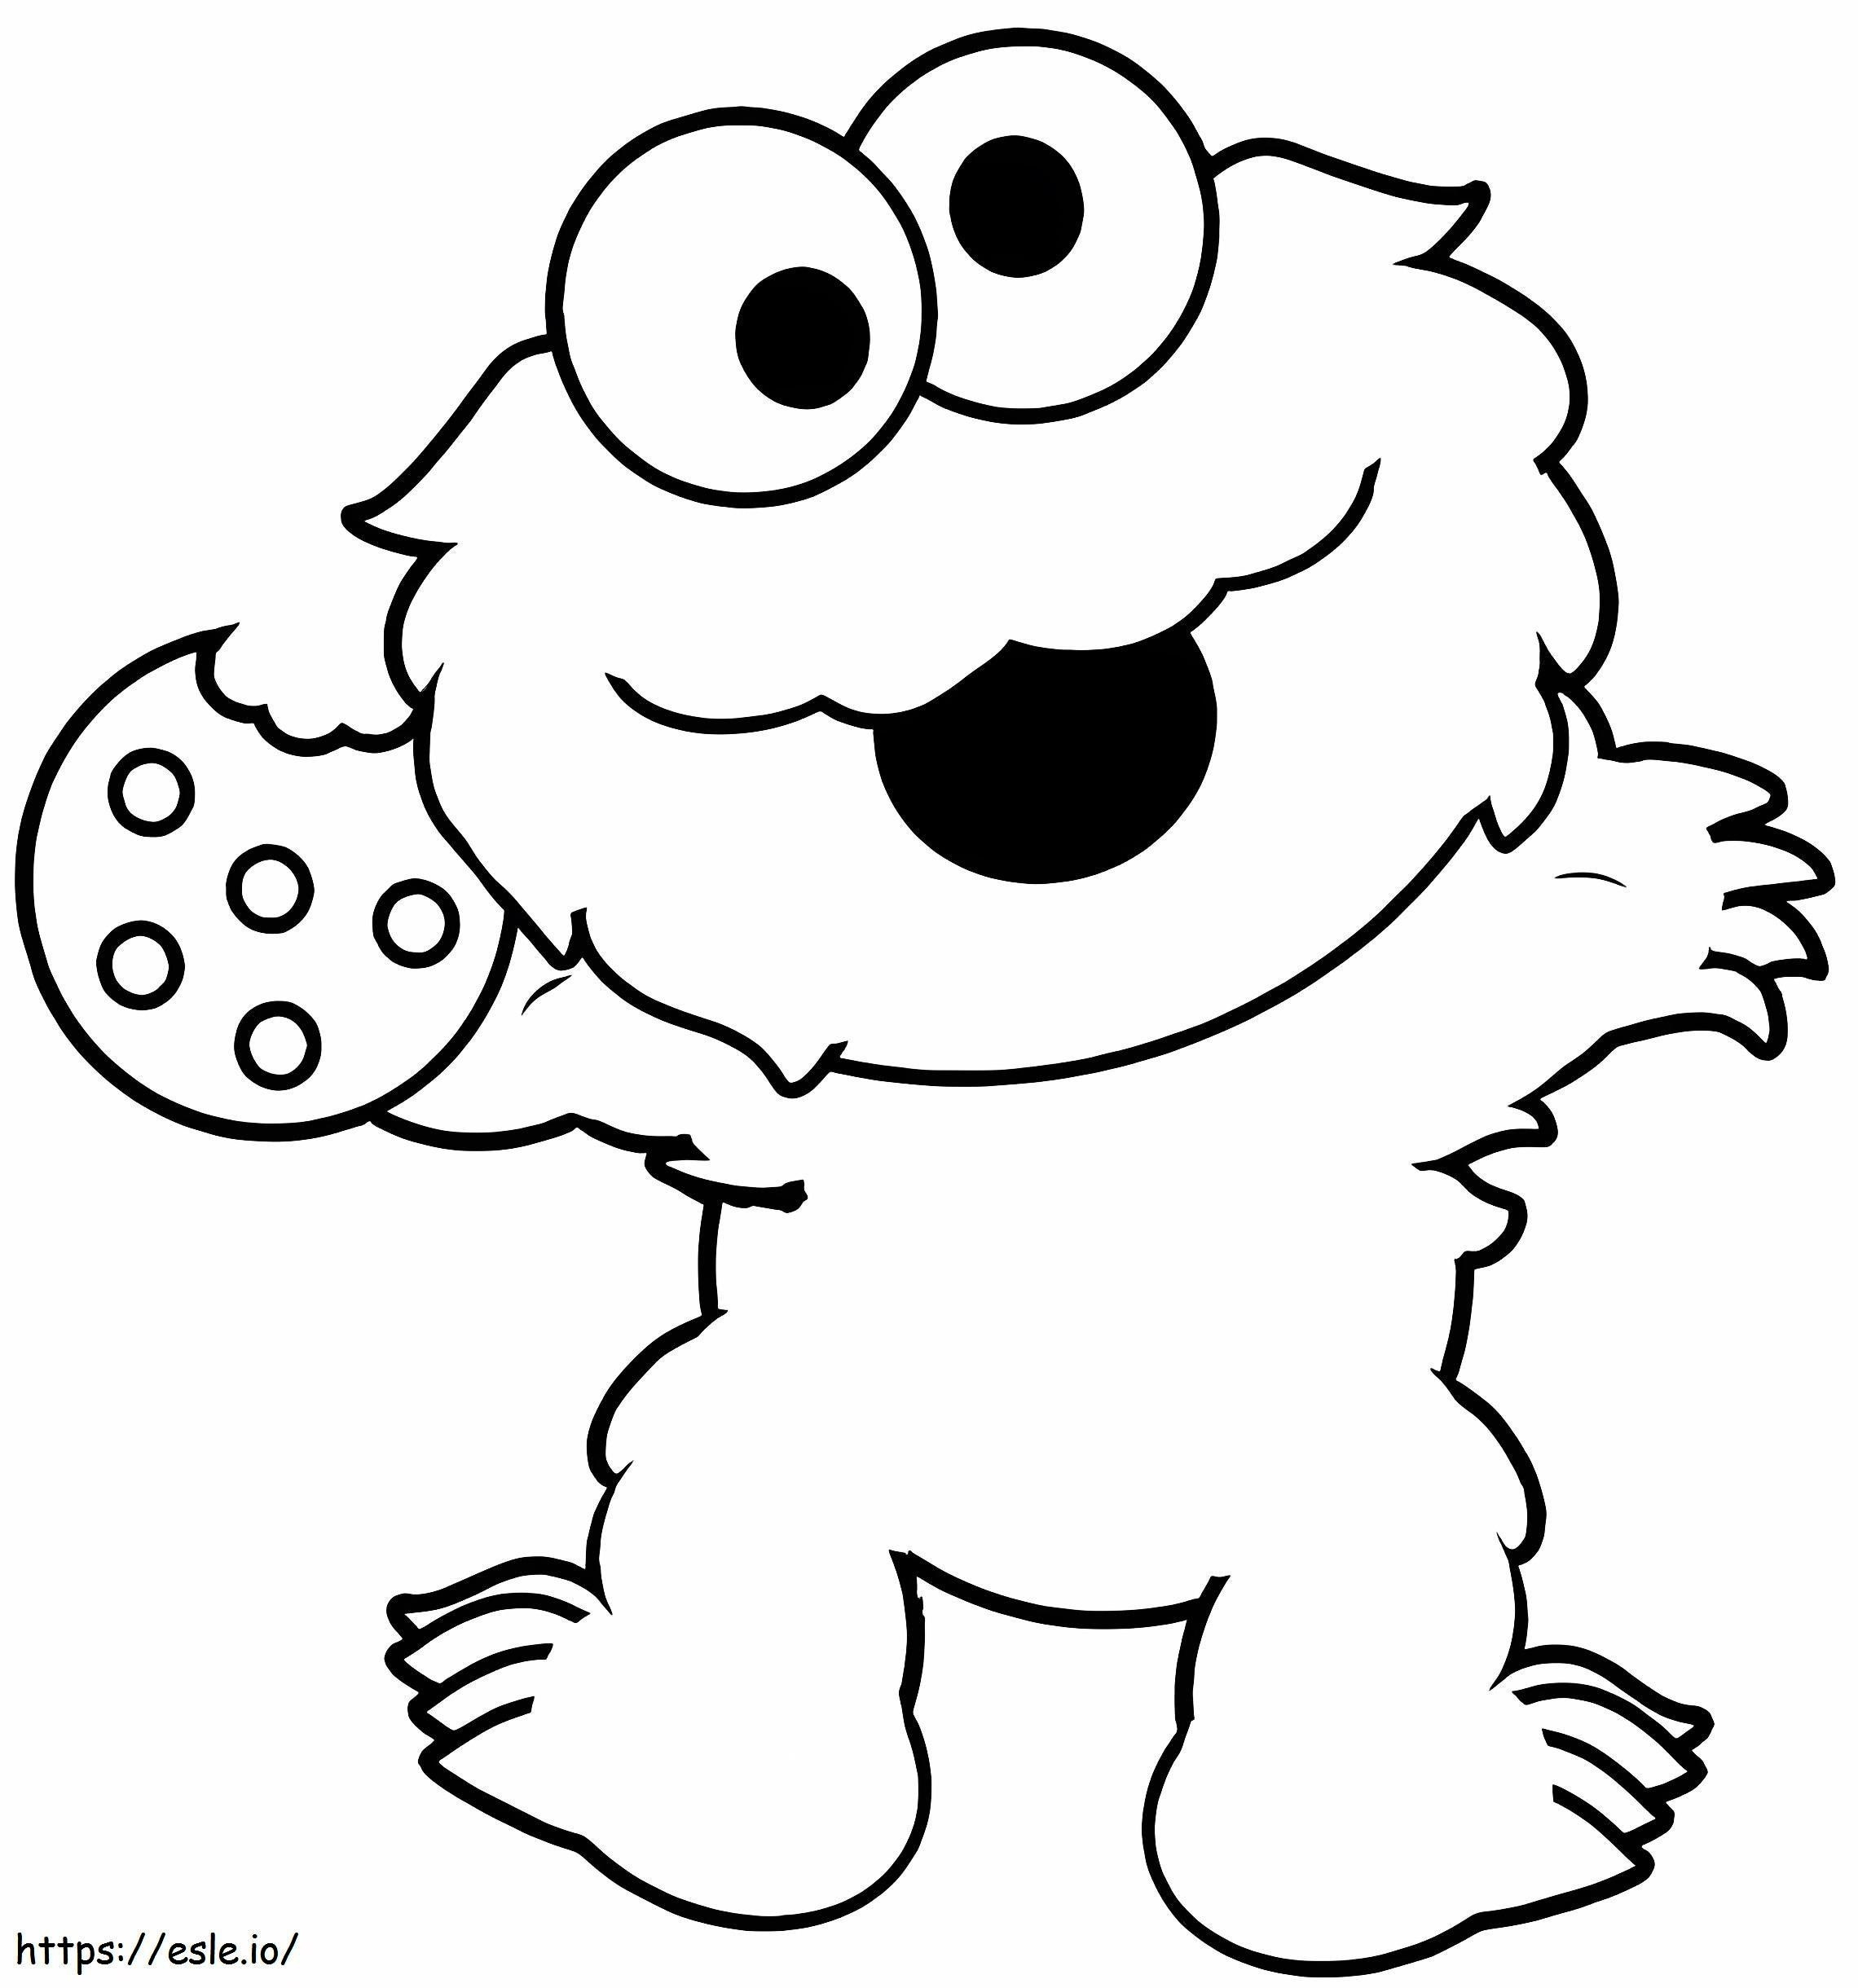 Baby Elmo Holding A Cookie coloring page